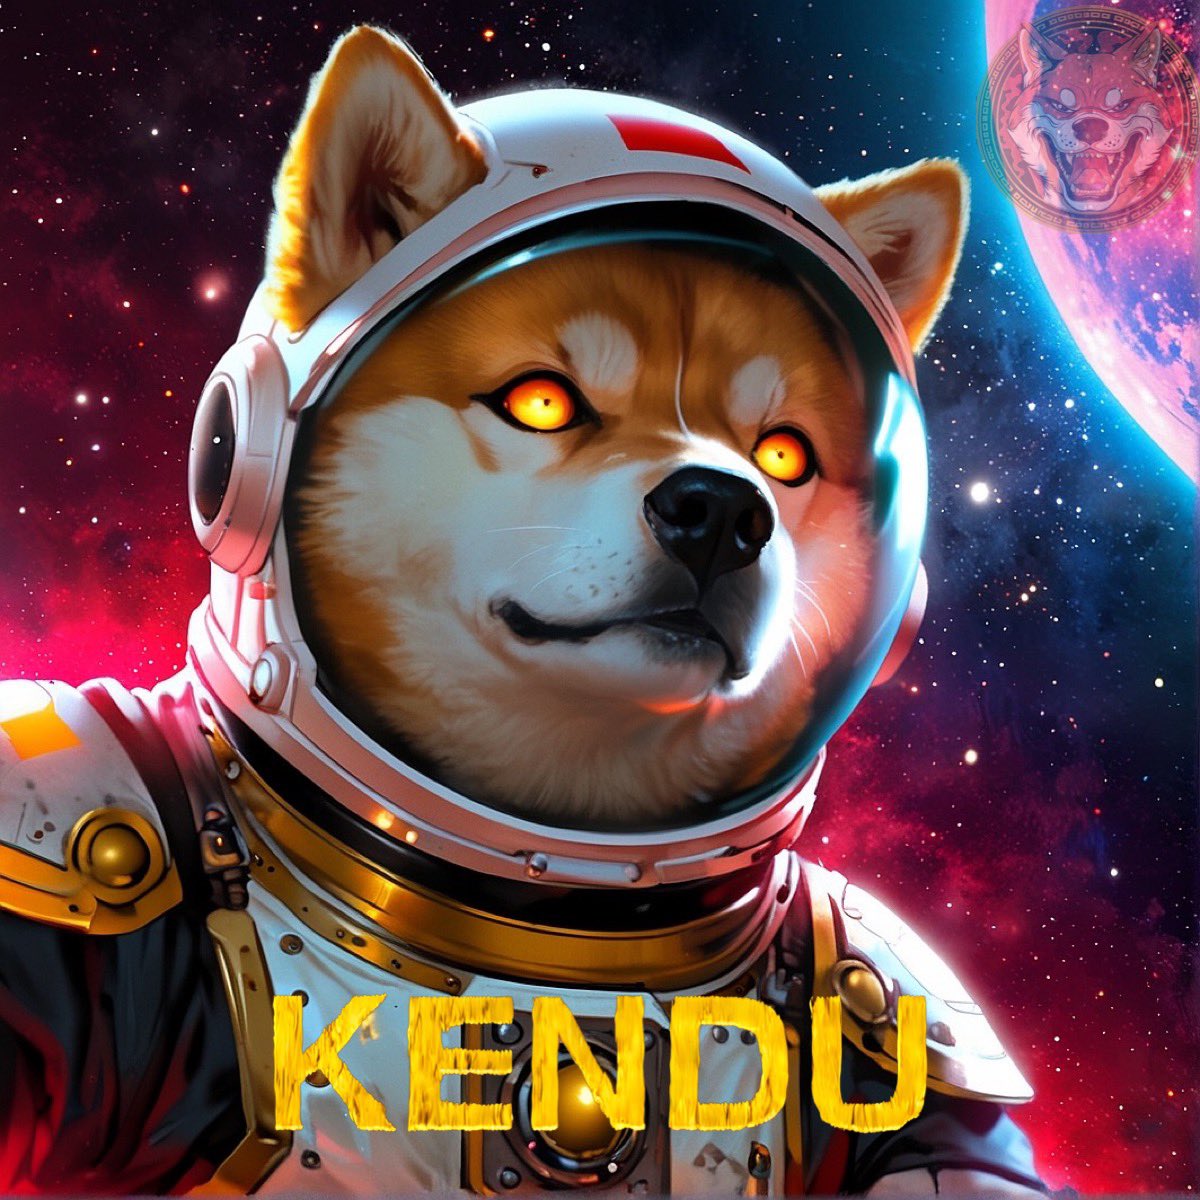 @CryptoTony__ #HelmetsOn Chads we are going to the moon @KenduInu 💹🚀💹🌖

The future of finance is upon us and $KENDU is here to make history in this space 🚀

We #KENDU it 💪

#TogetherWeRise #TogetherWeKenduAnything 
#DeFi done the right way 💪🪖💪